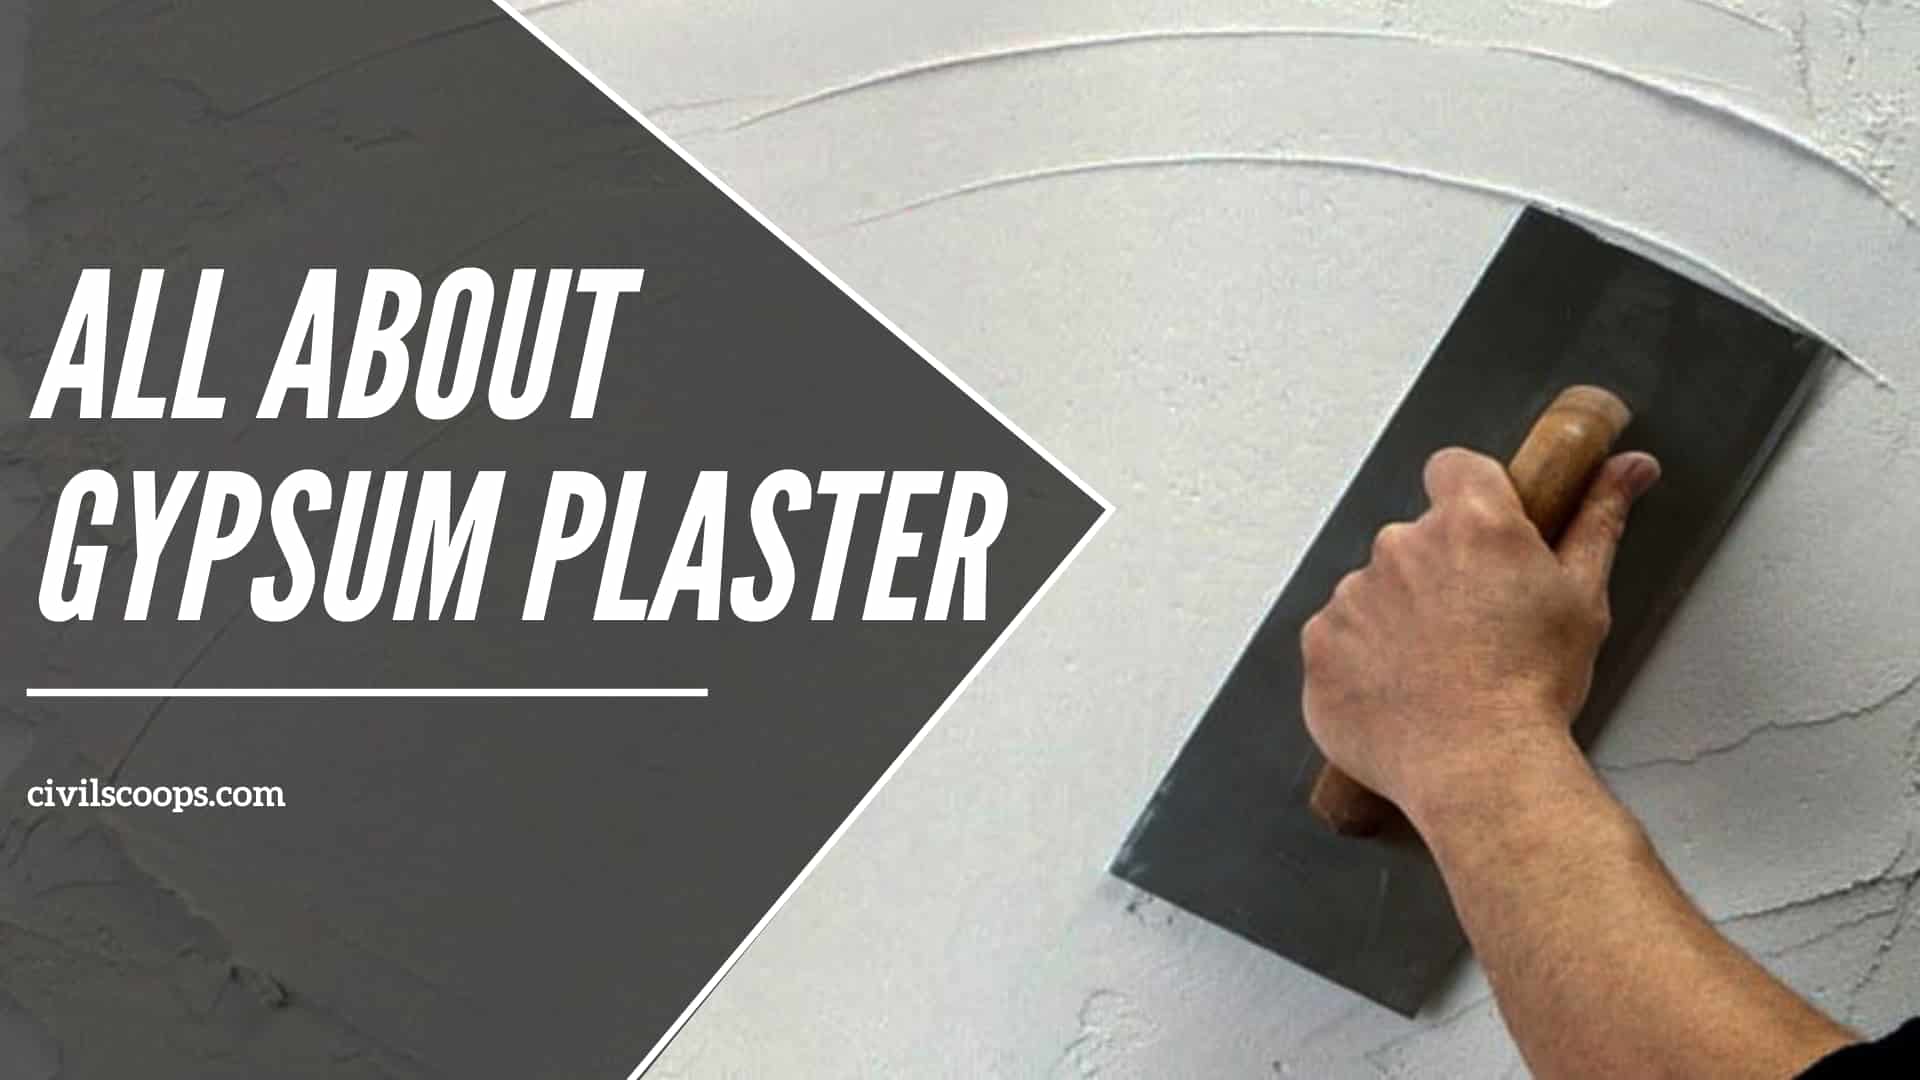 All about Gypsum Plaster